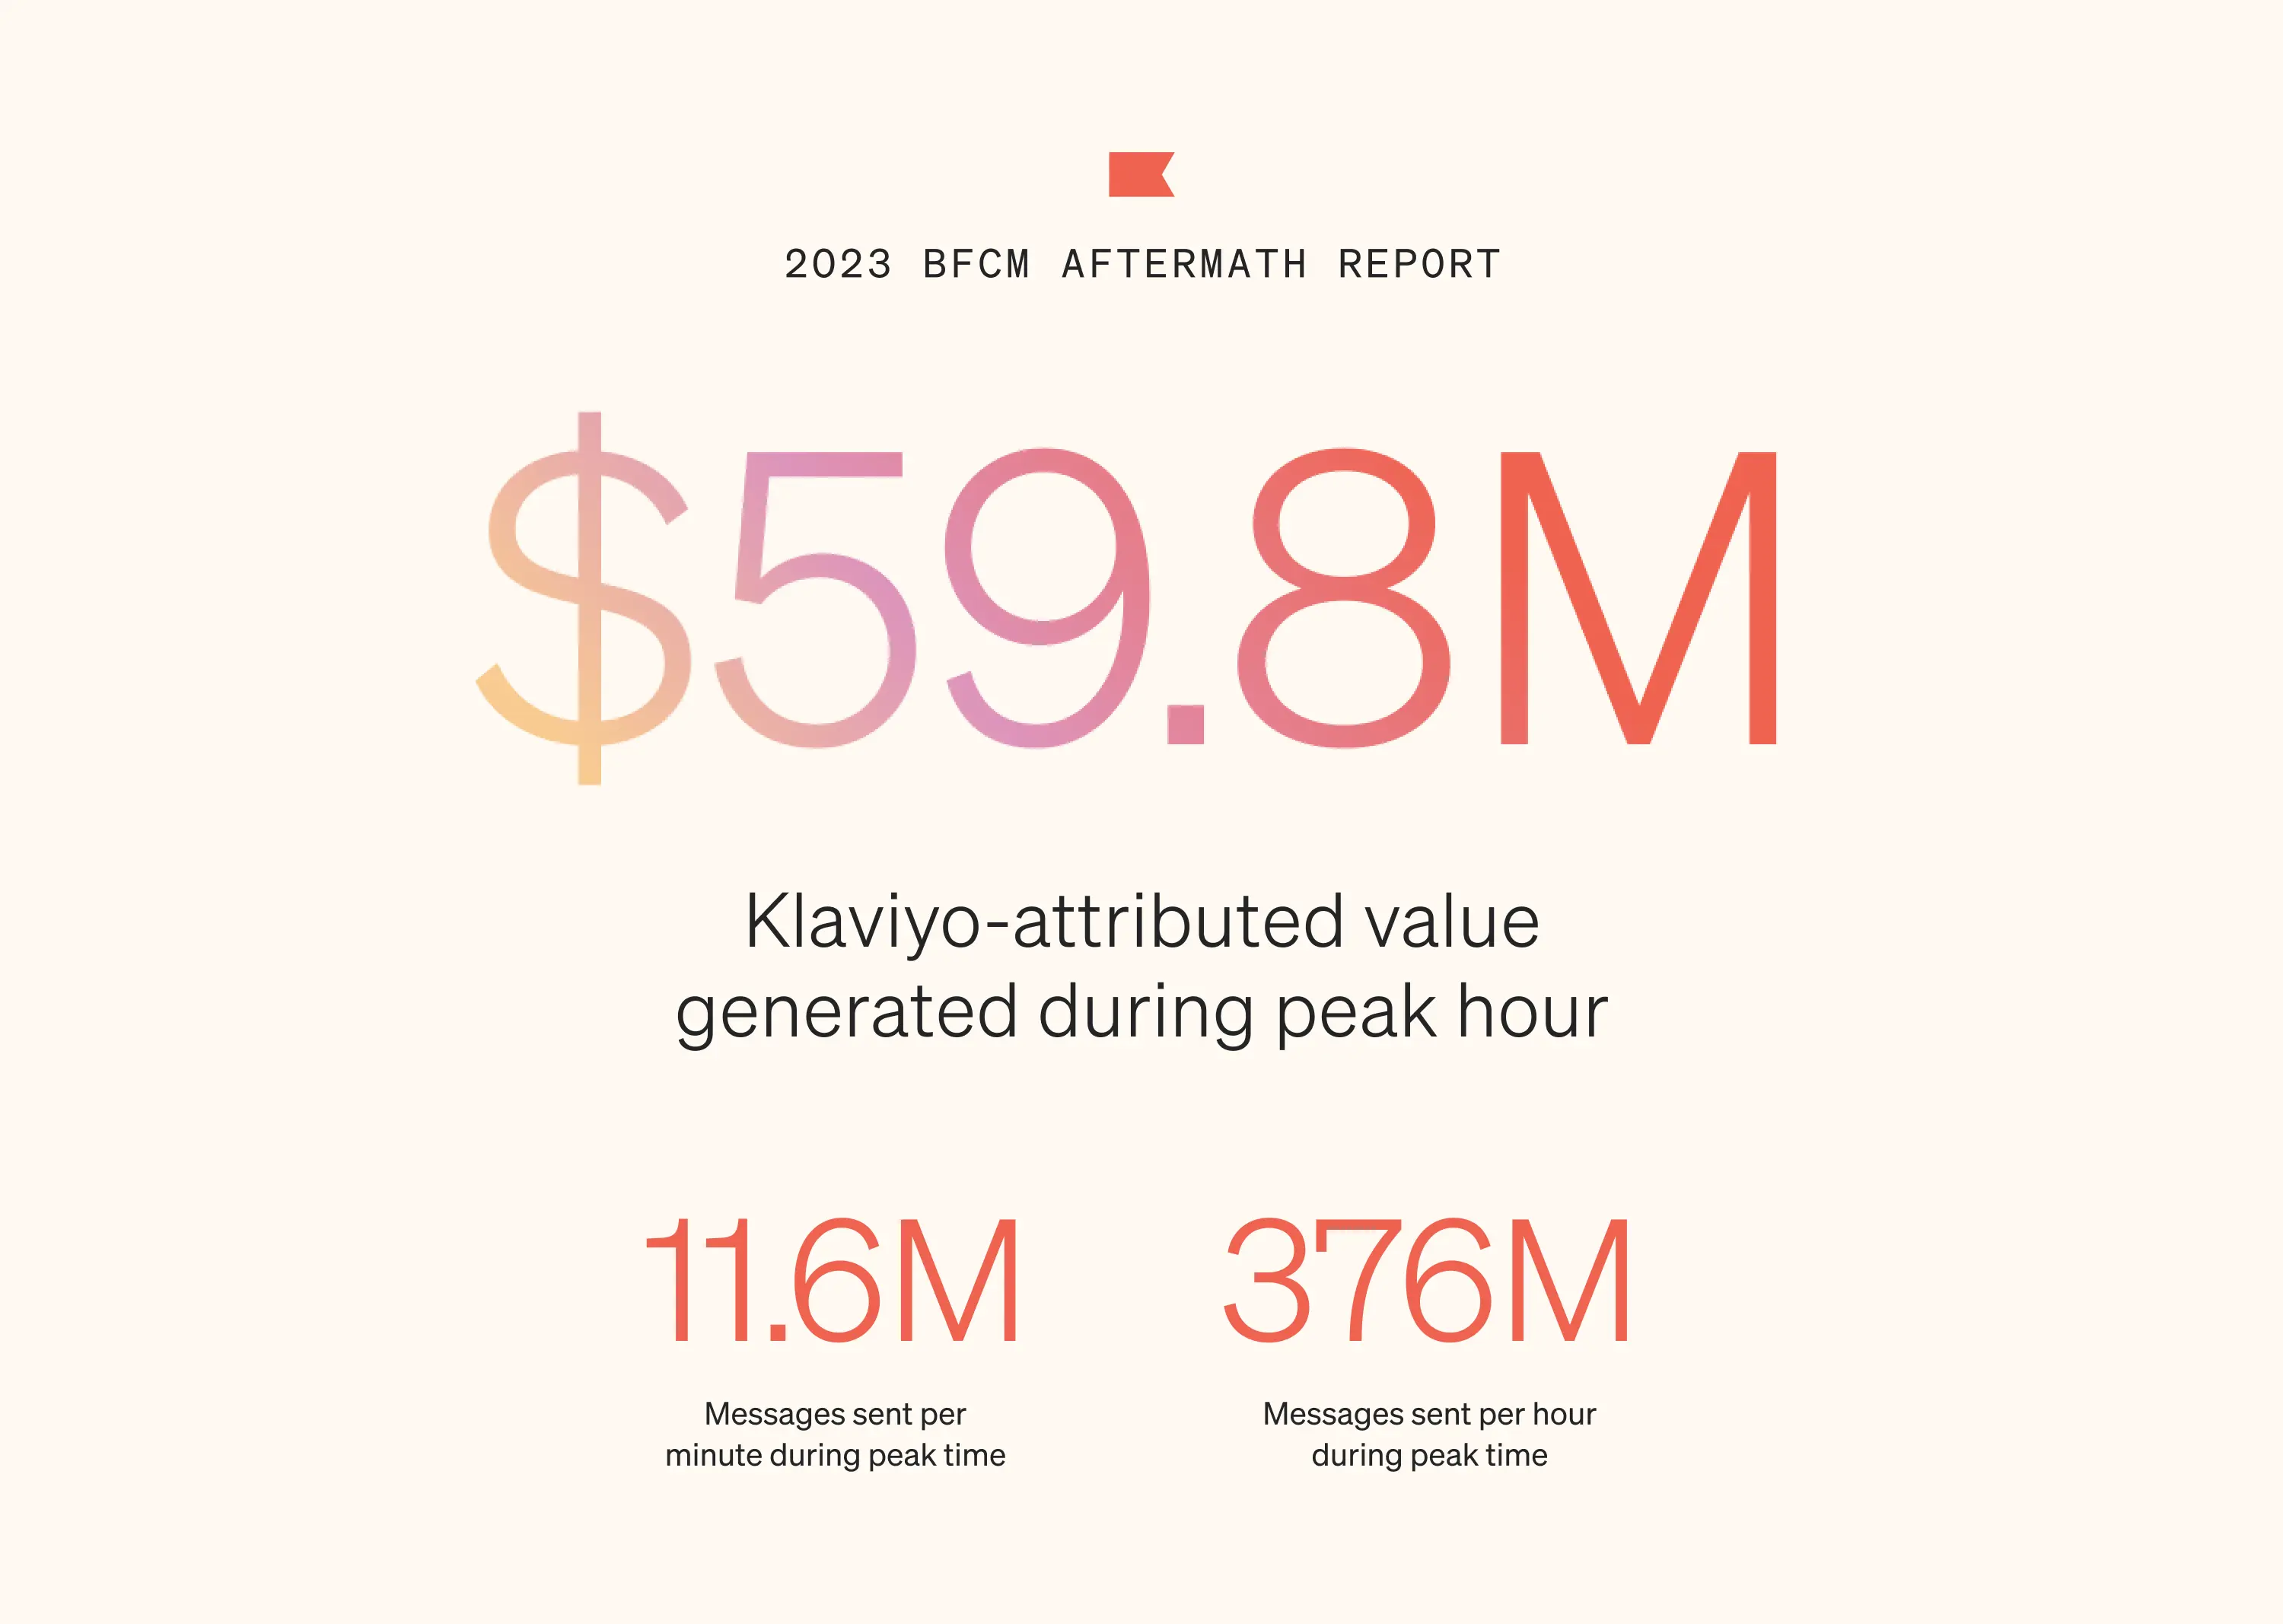 In a color scheme of poppy font on a cotton background, image visualizes data from peak BFCM hours for Klaviyo customers, including 11.6M messages sent per minute; 376M messages sent per hour; and nearly $60M Klaviyo-attributed value.